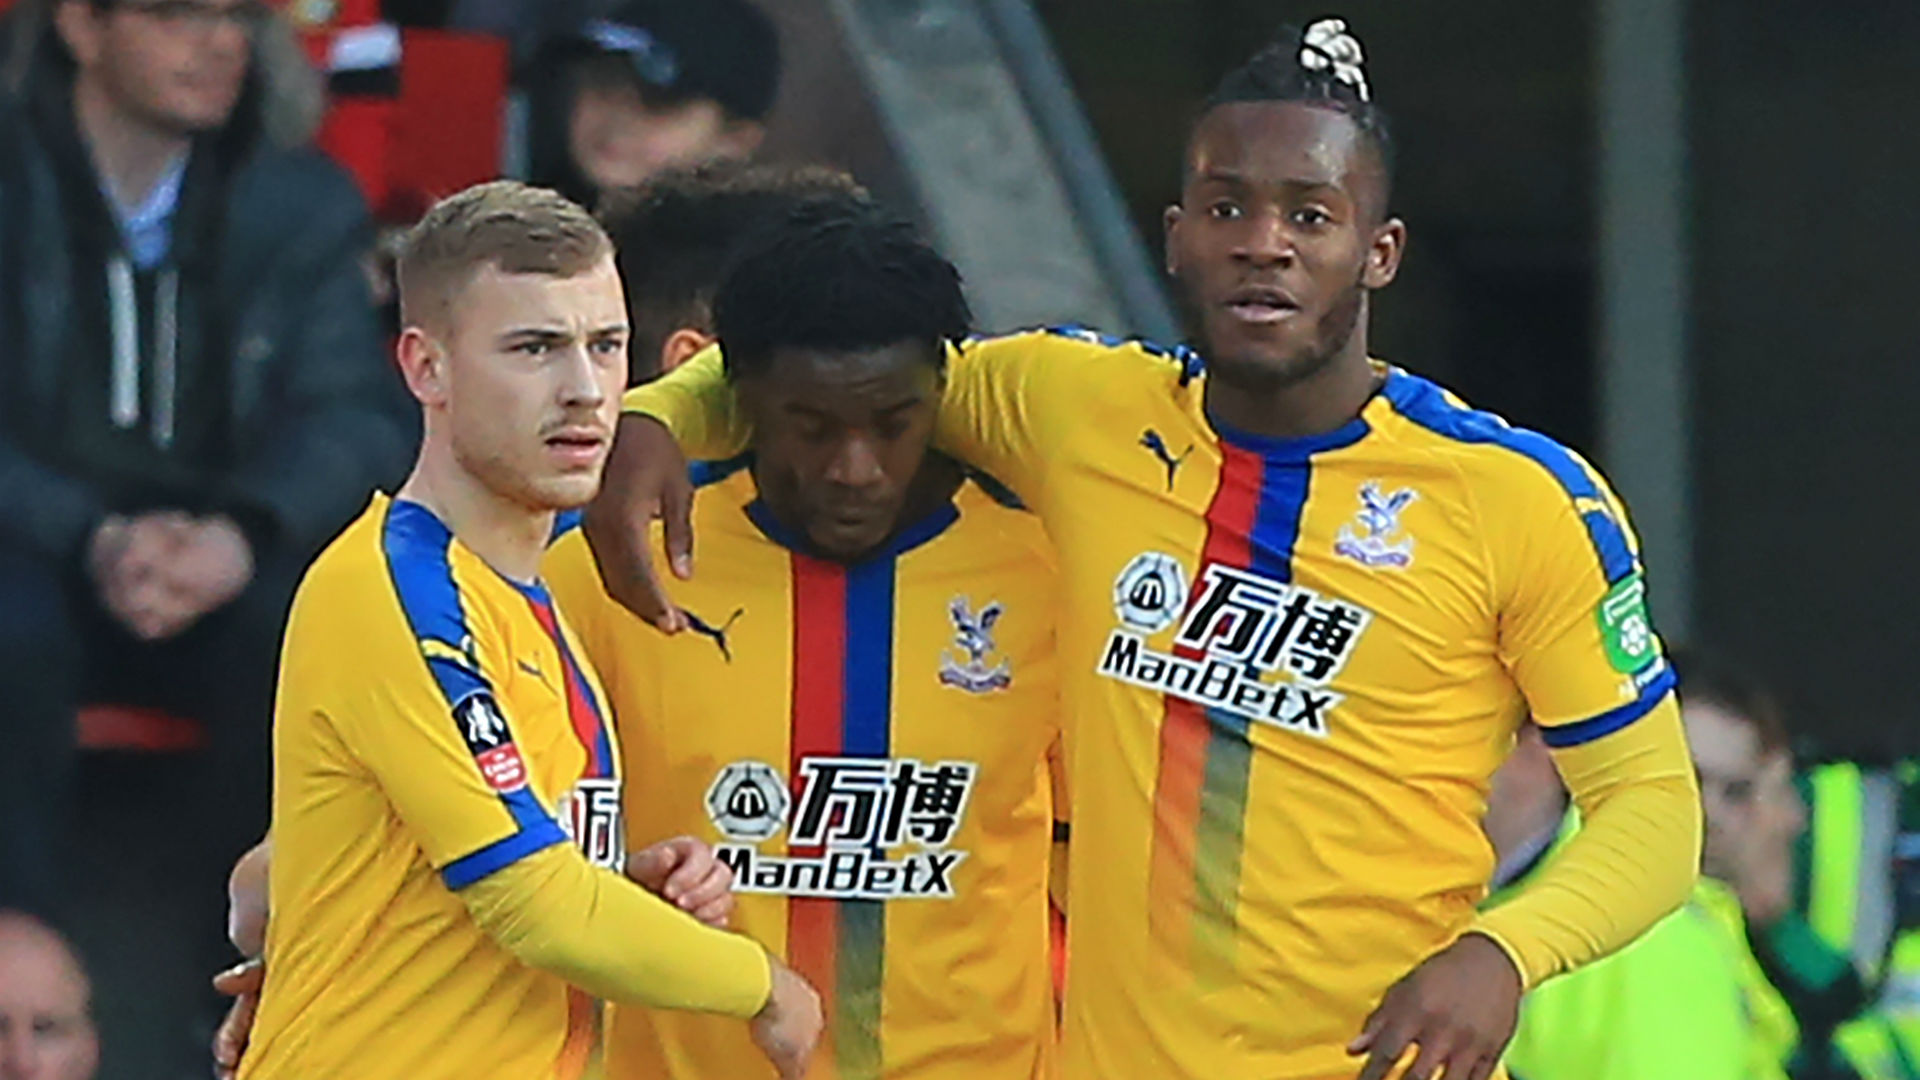 Hogdson believed Crystal Palace could beat Bournemouth with 10 men - Schlupp